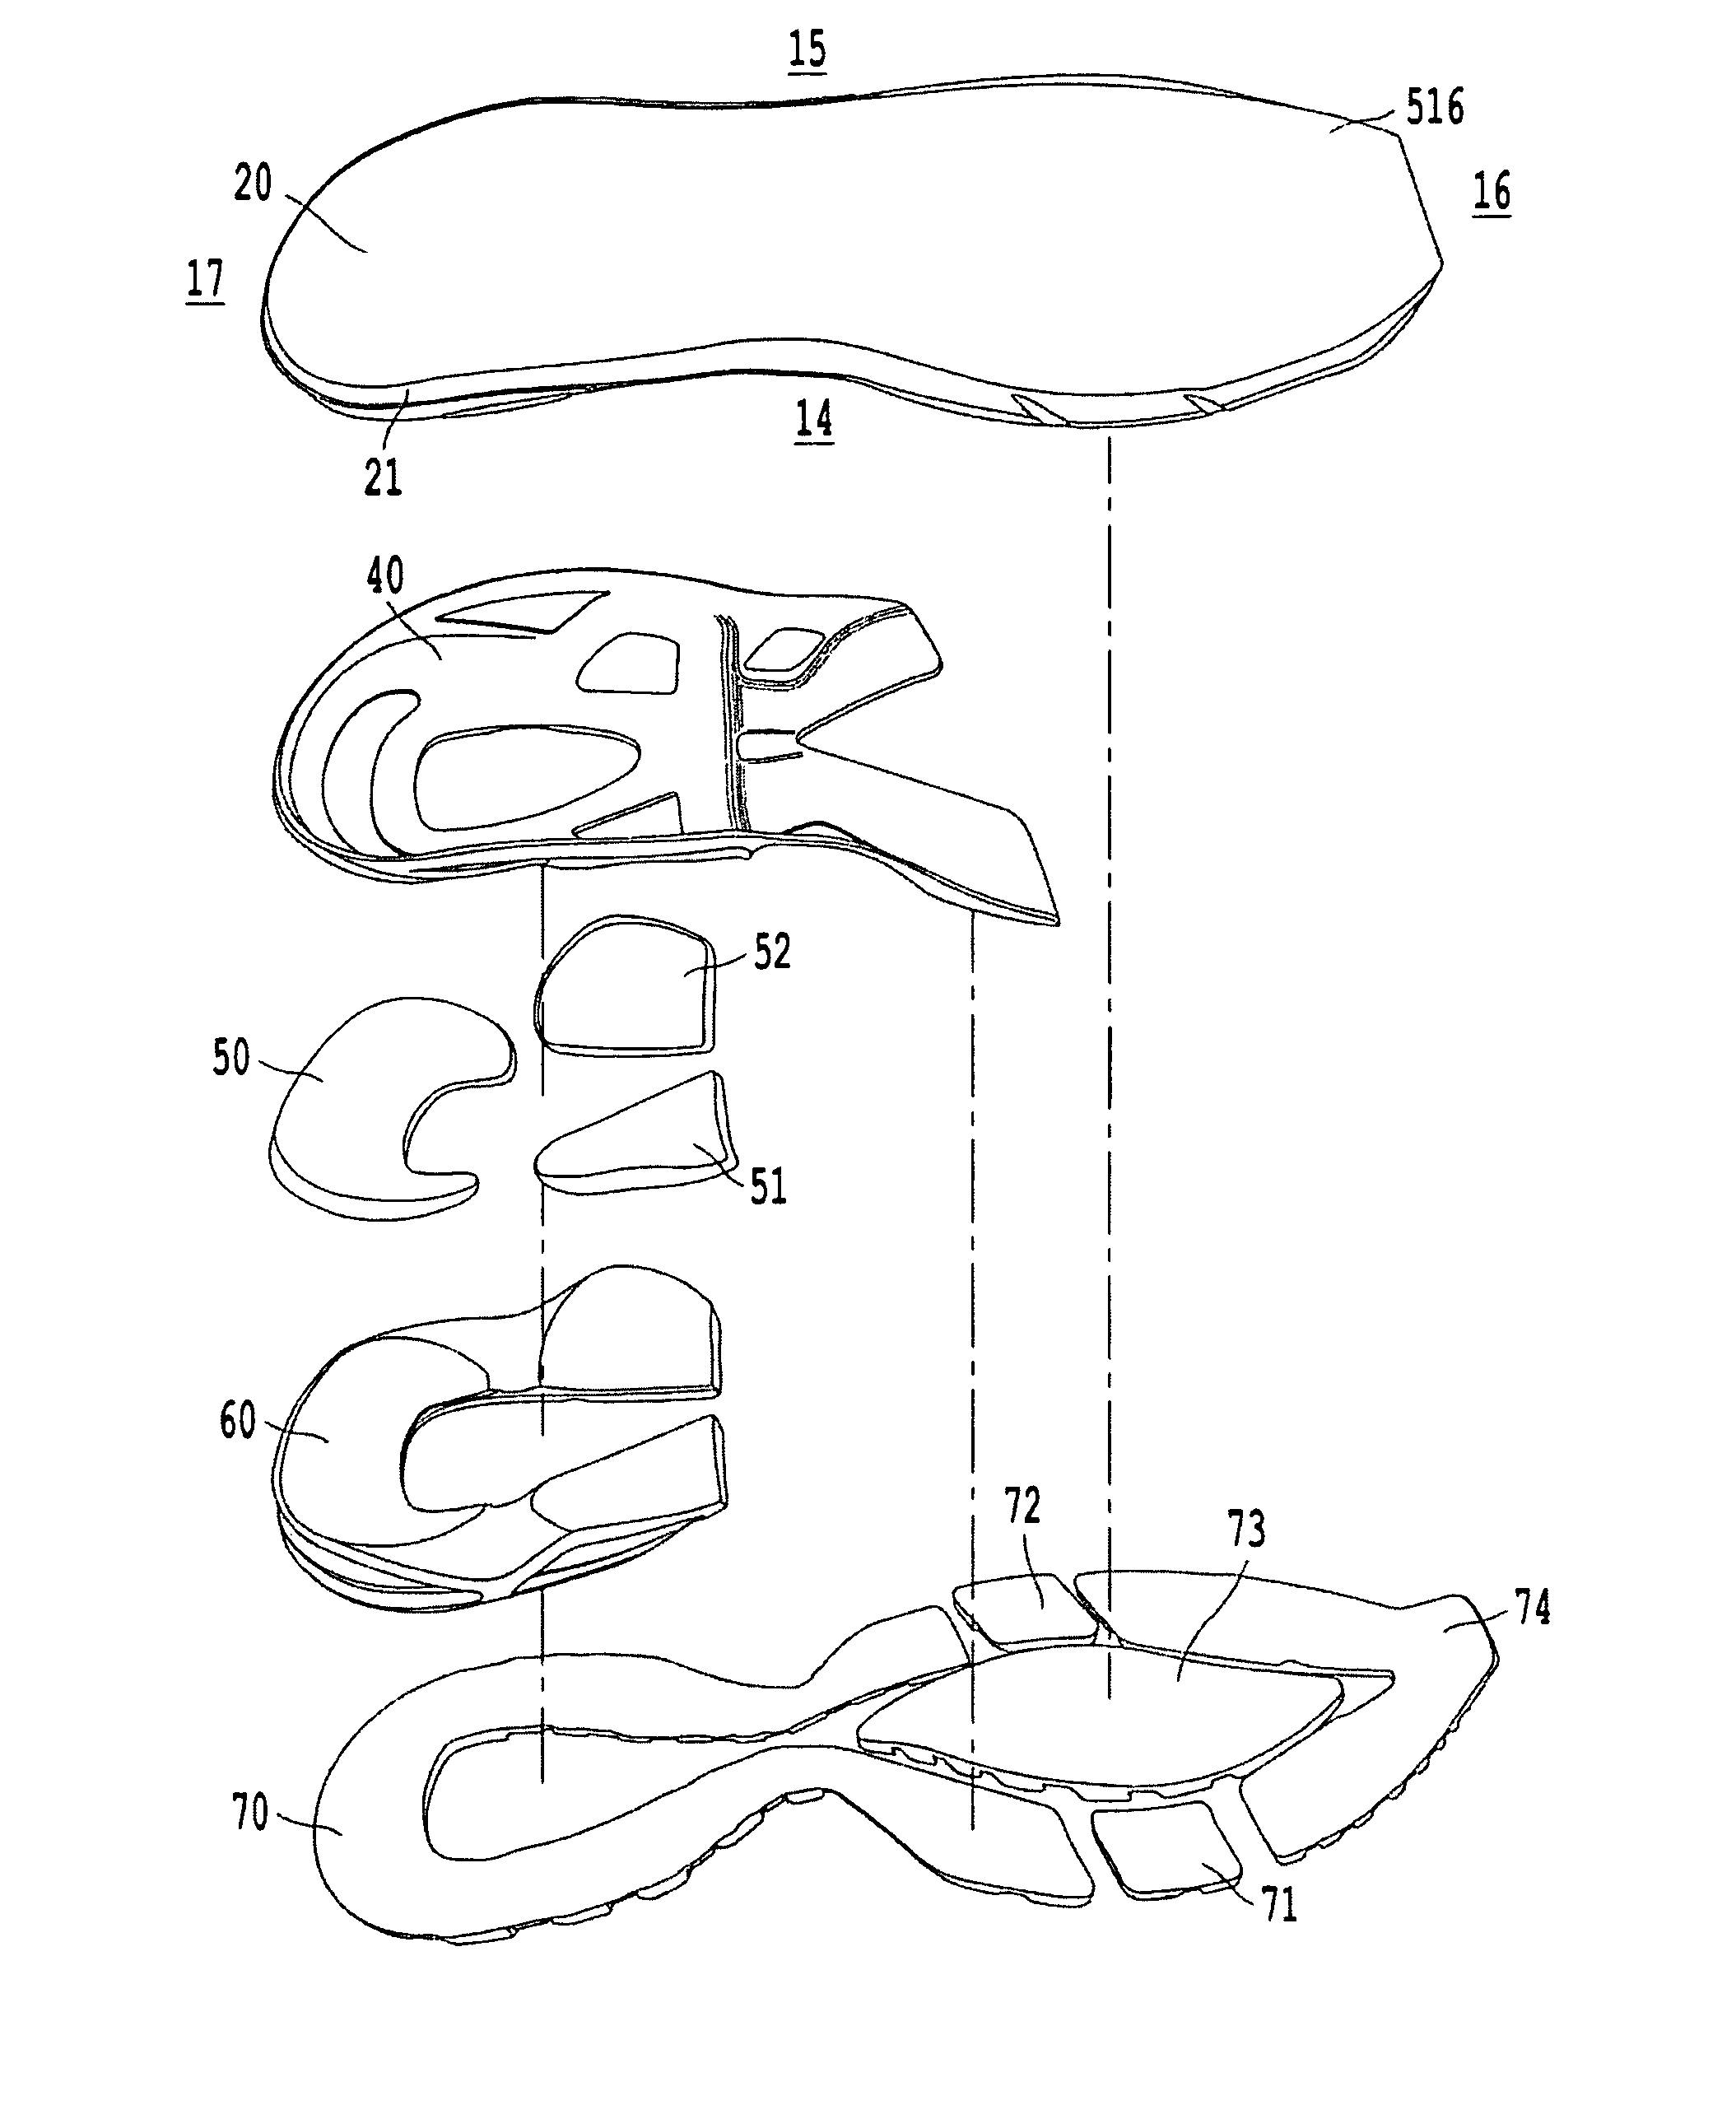 Athletic shoe with cushion structures